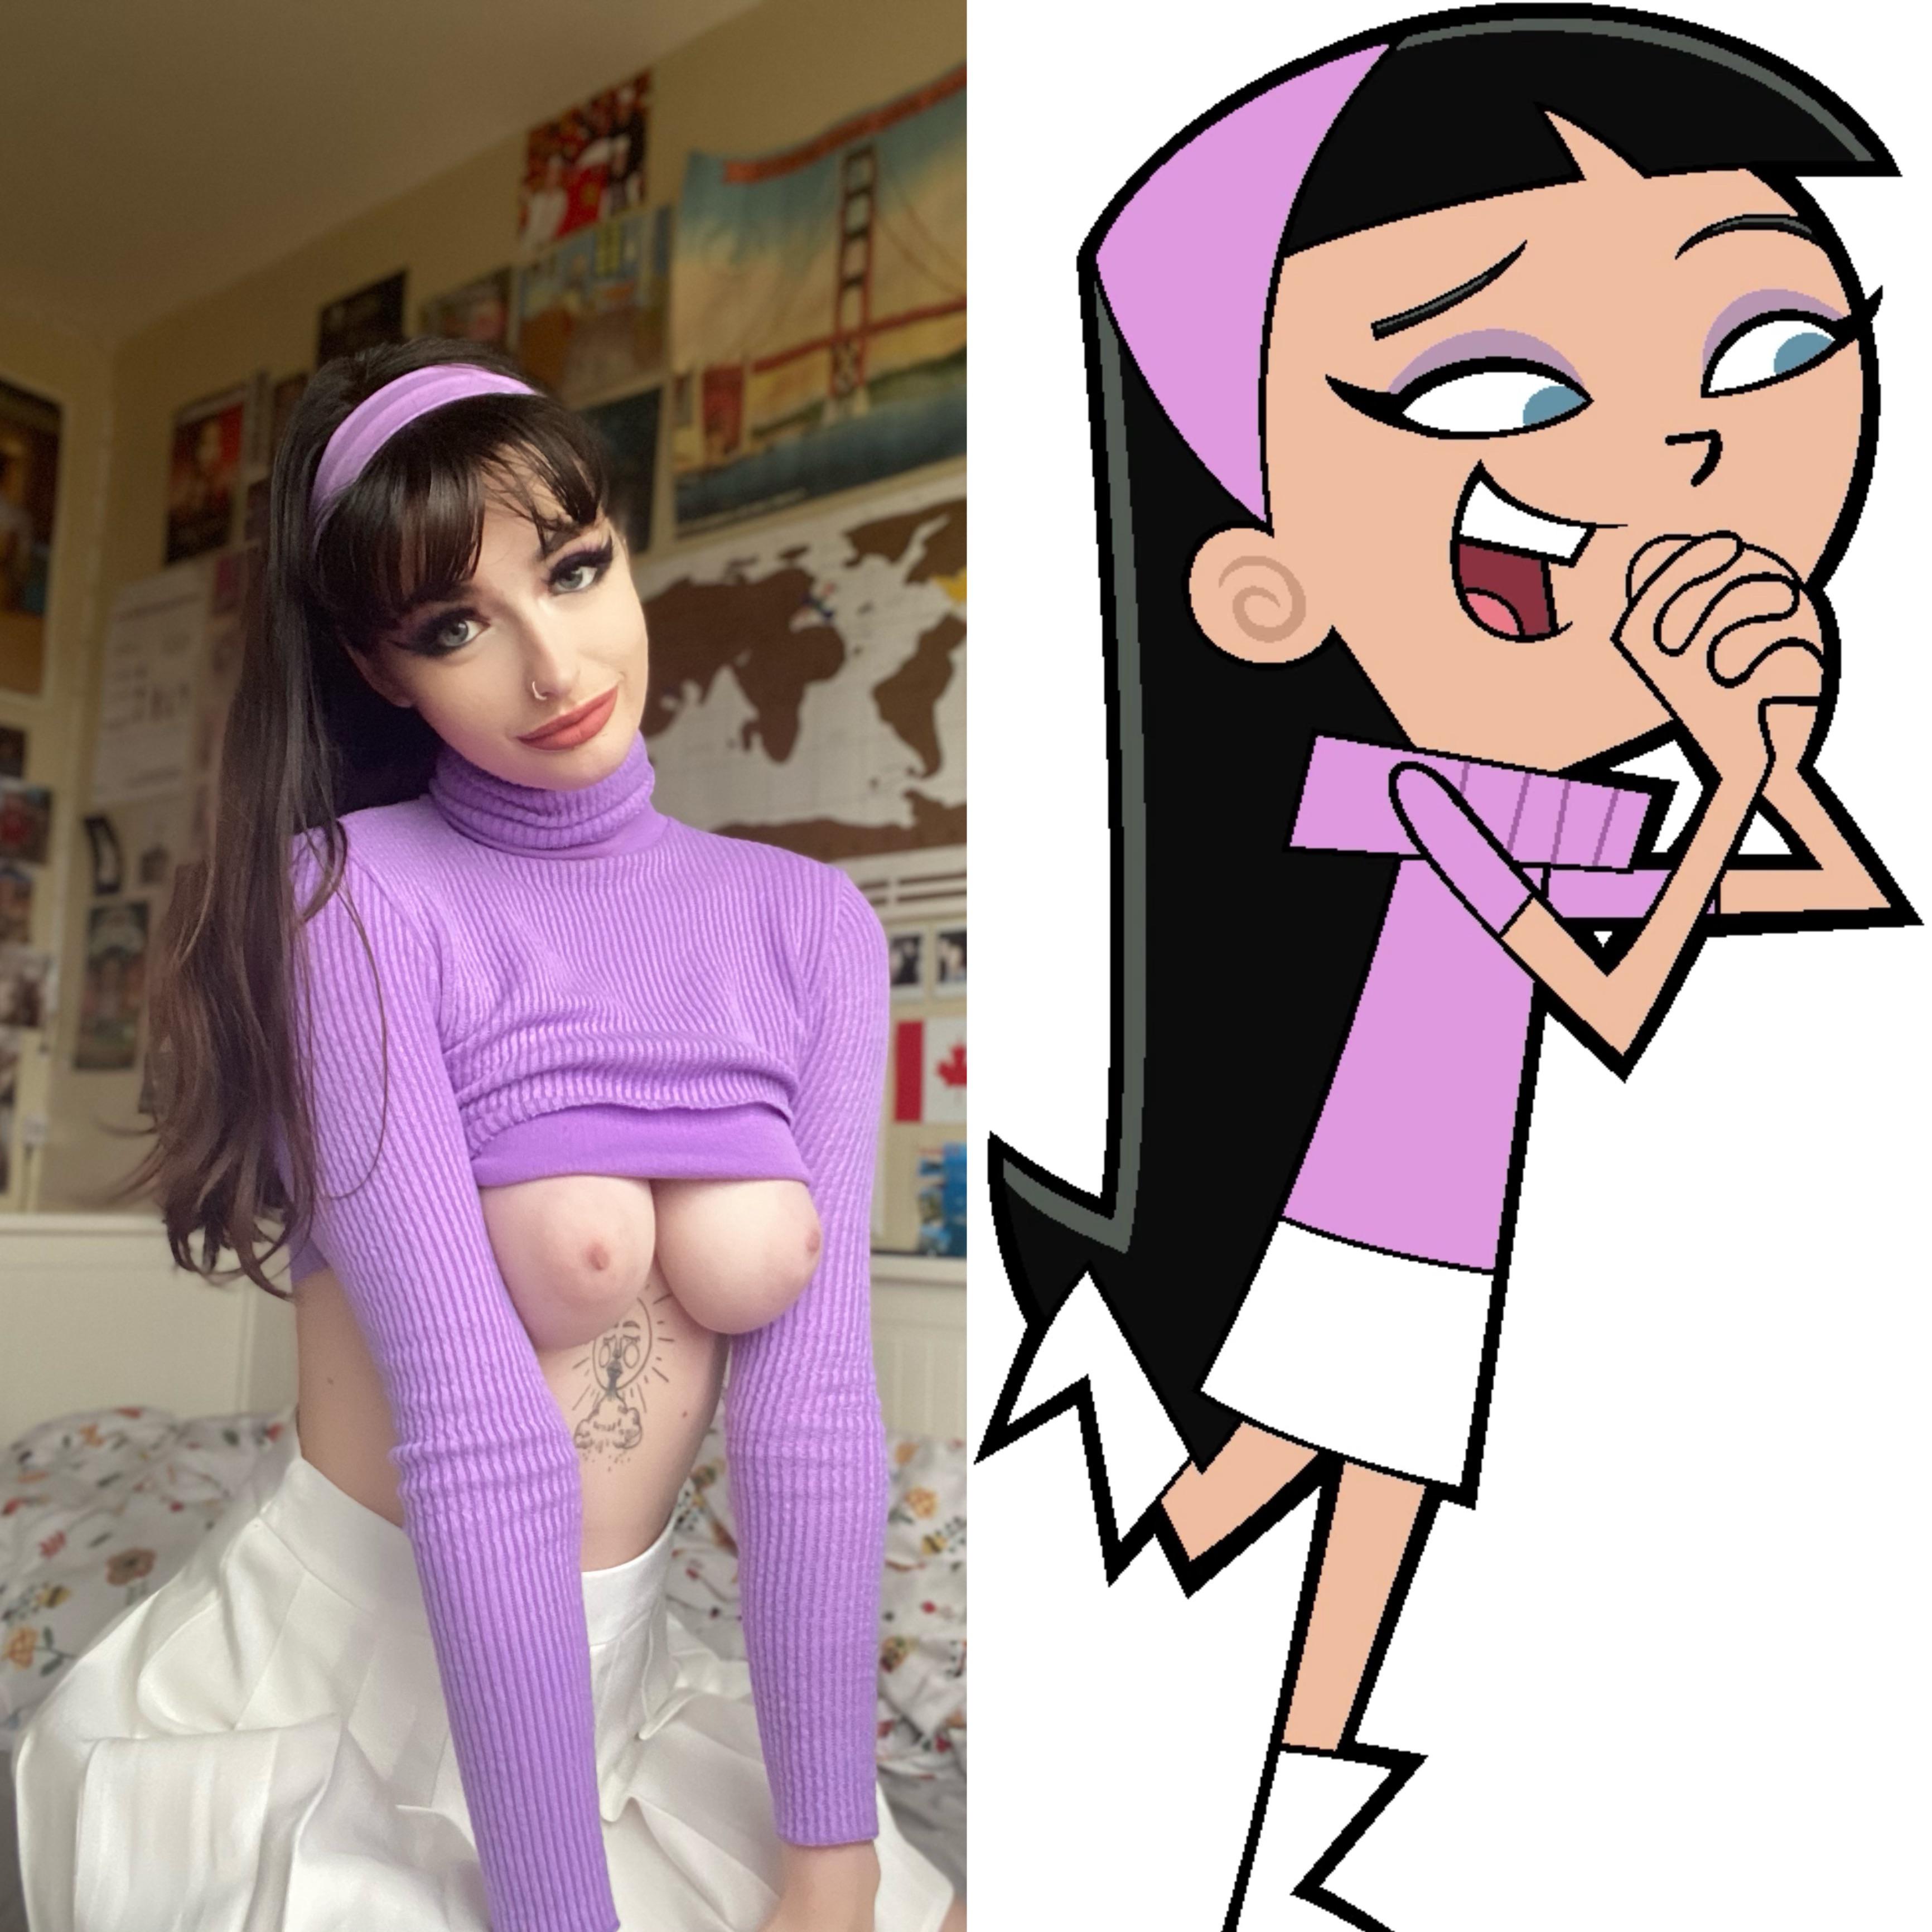 Slutty Trixie Tang from Fairly Odd Parents by u/claudianimhrucu